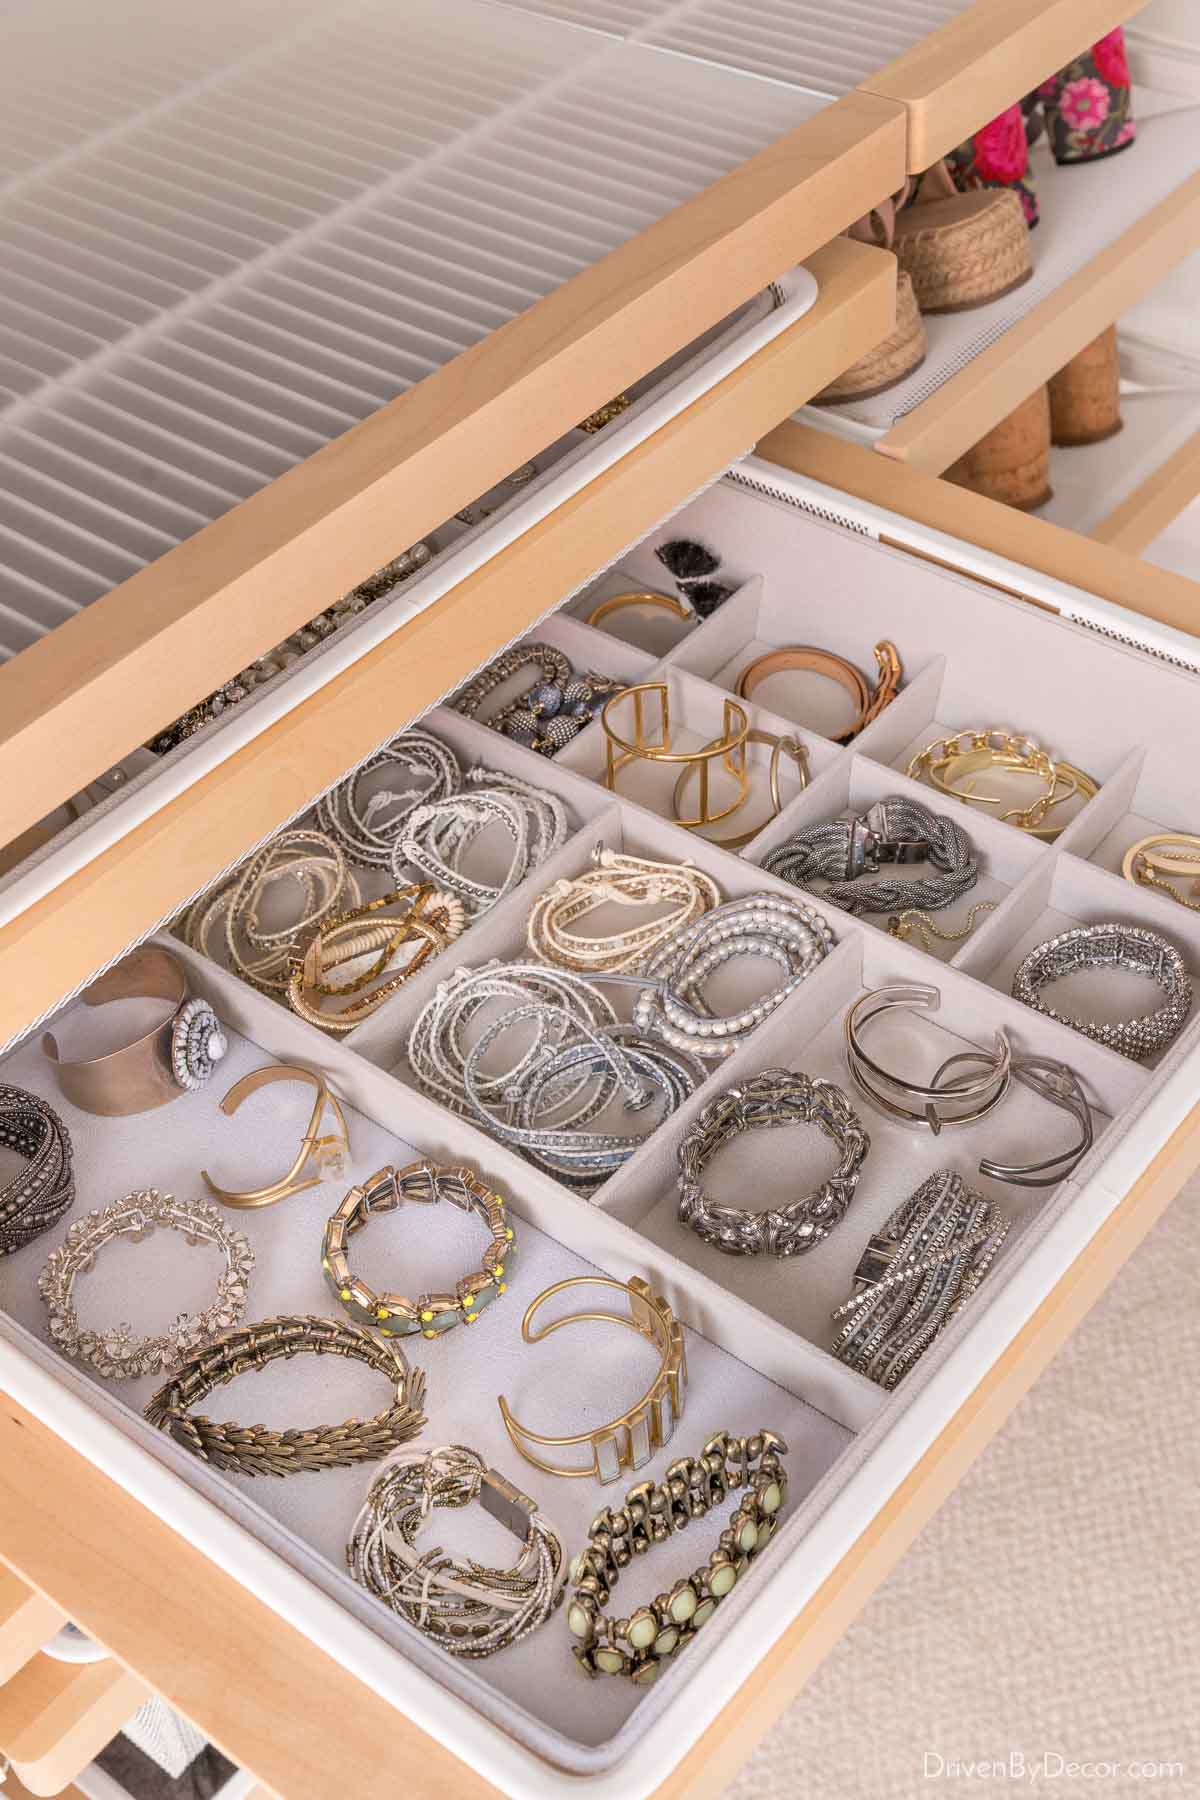 The jewelry organizer in our Elfa closet system